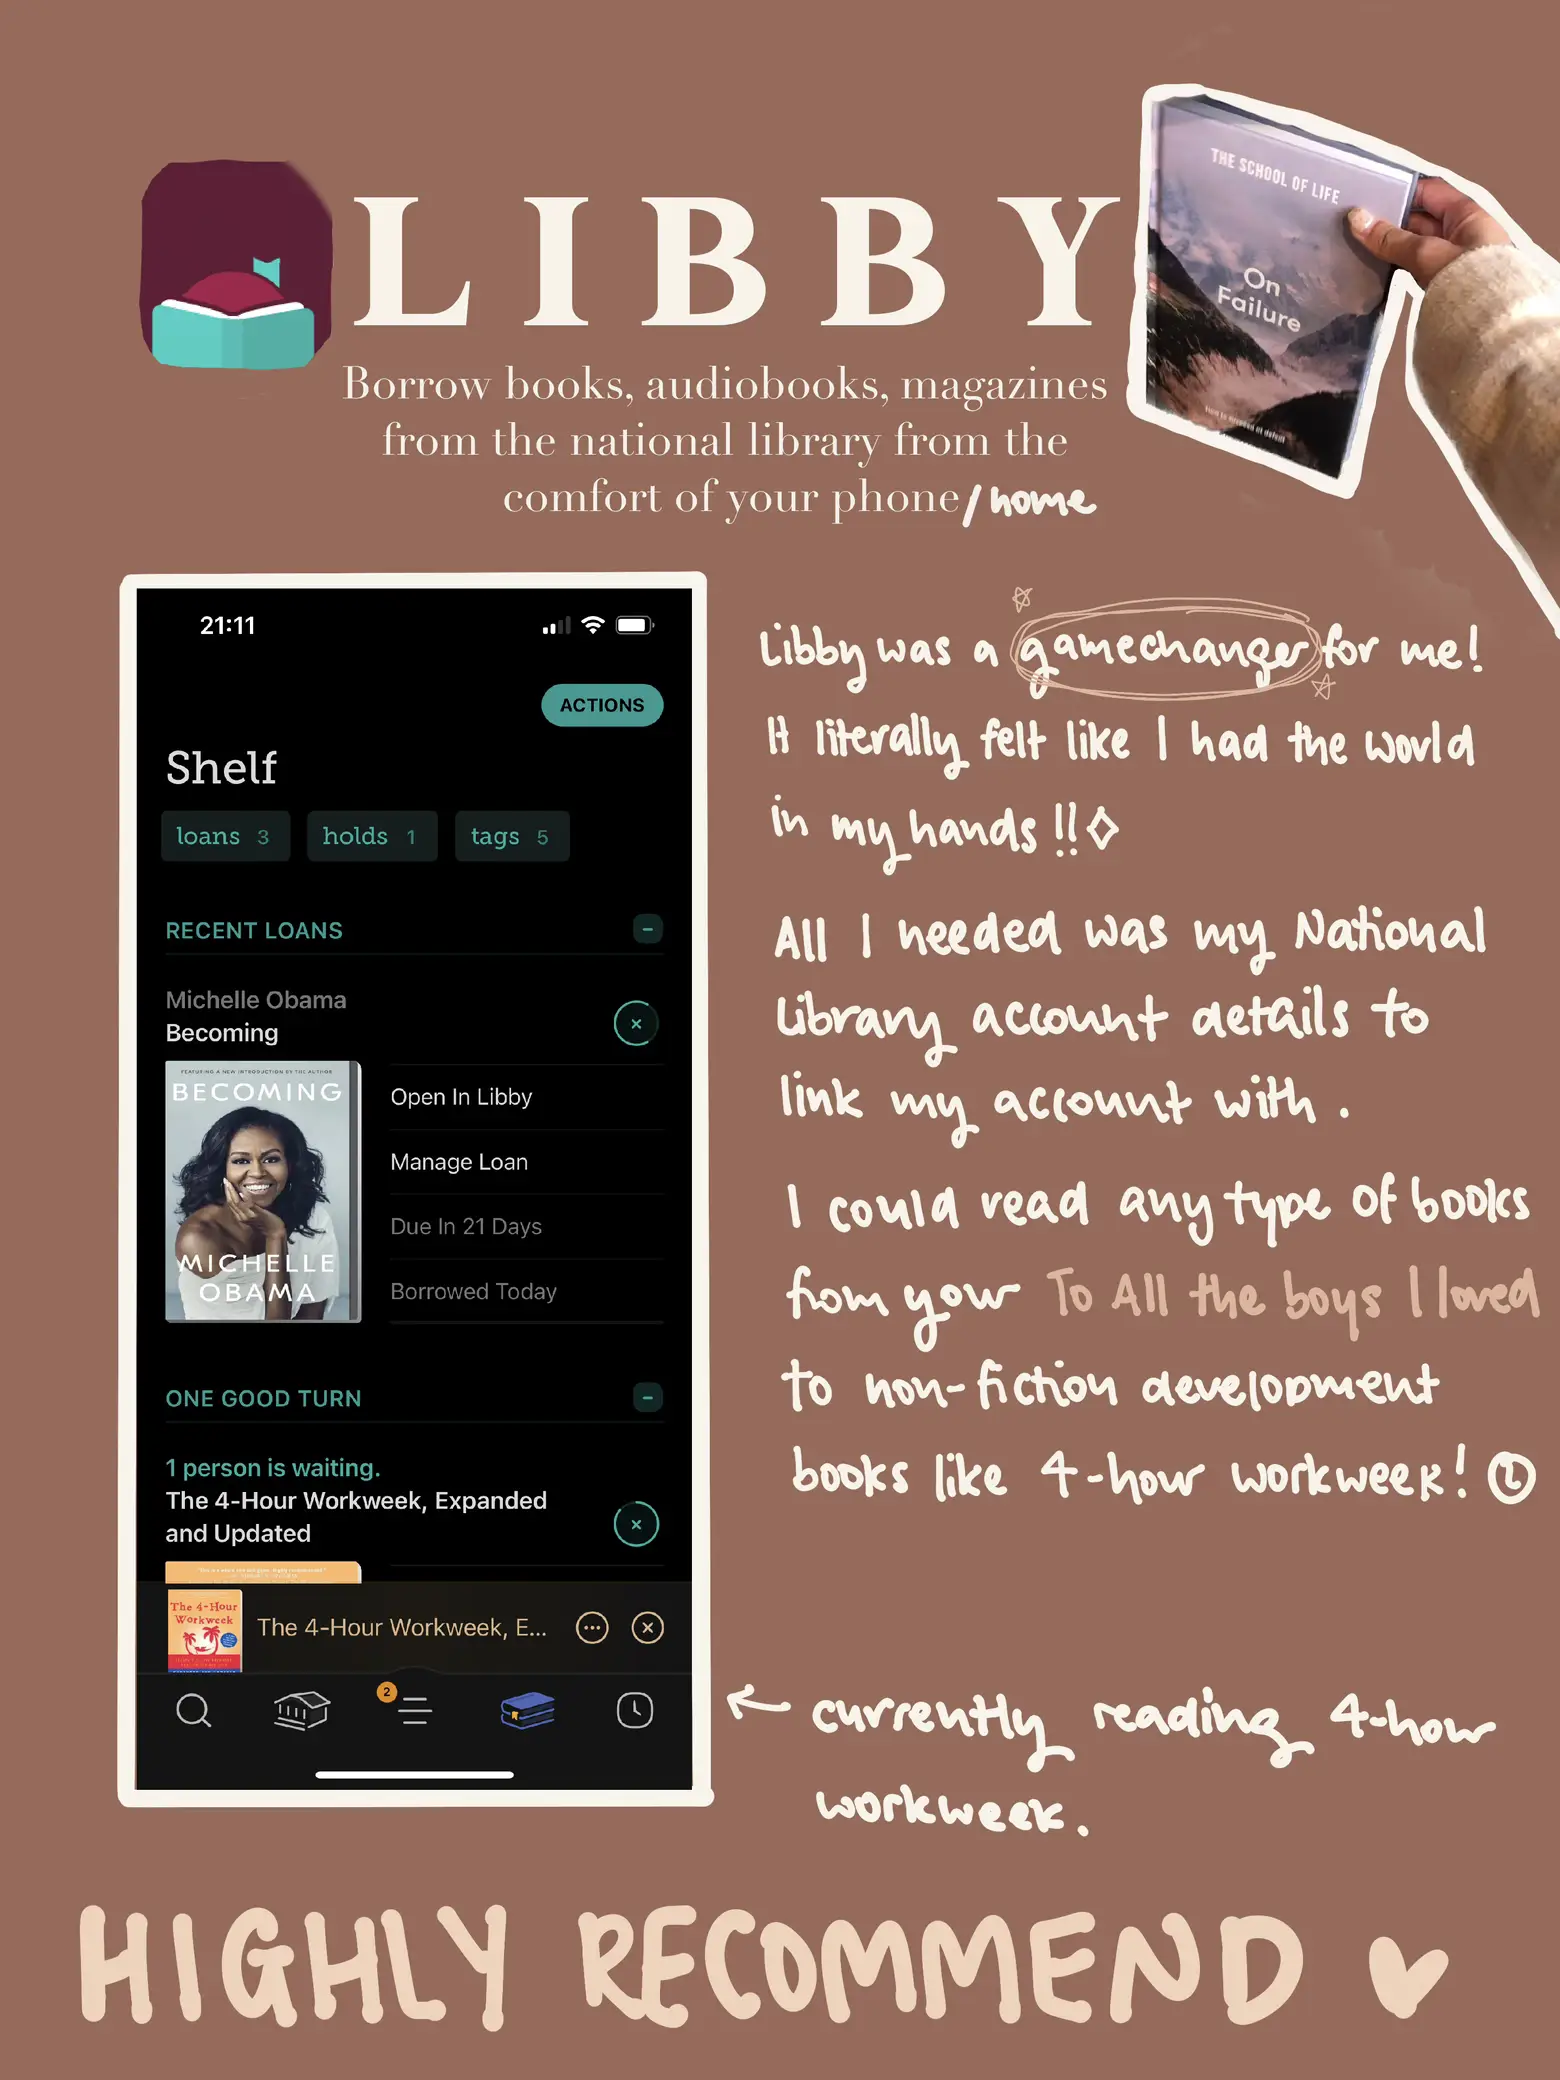 Libby, the Reading Companion to the NLB Mobile app